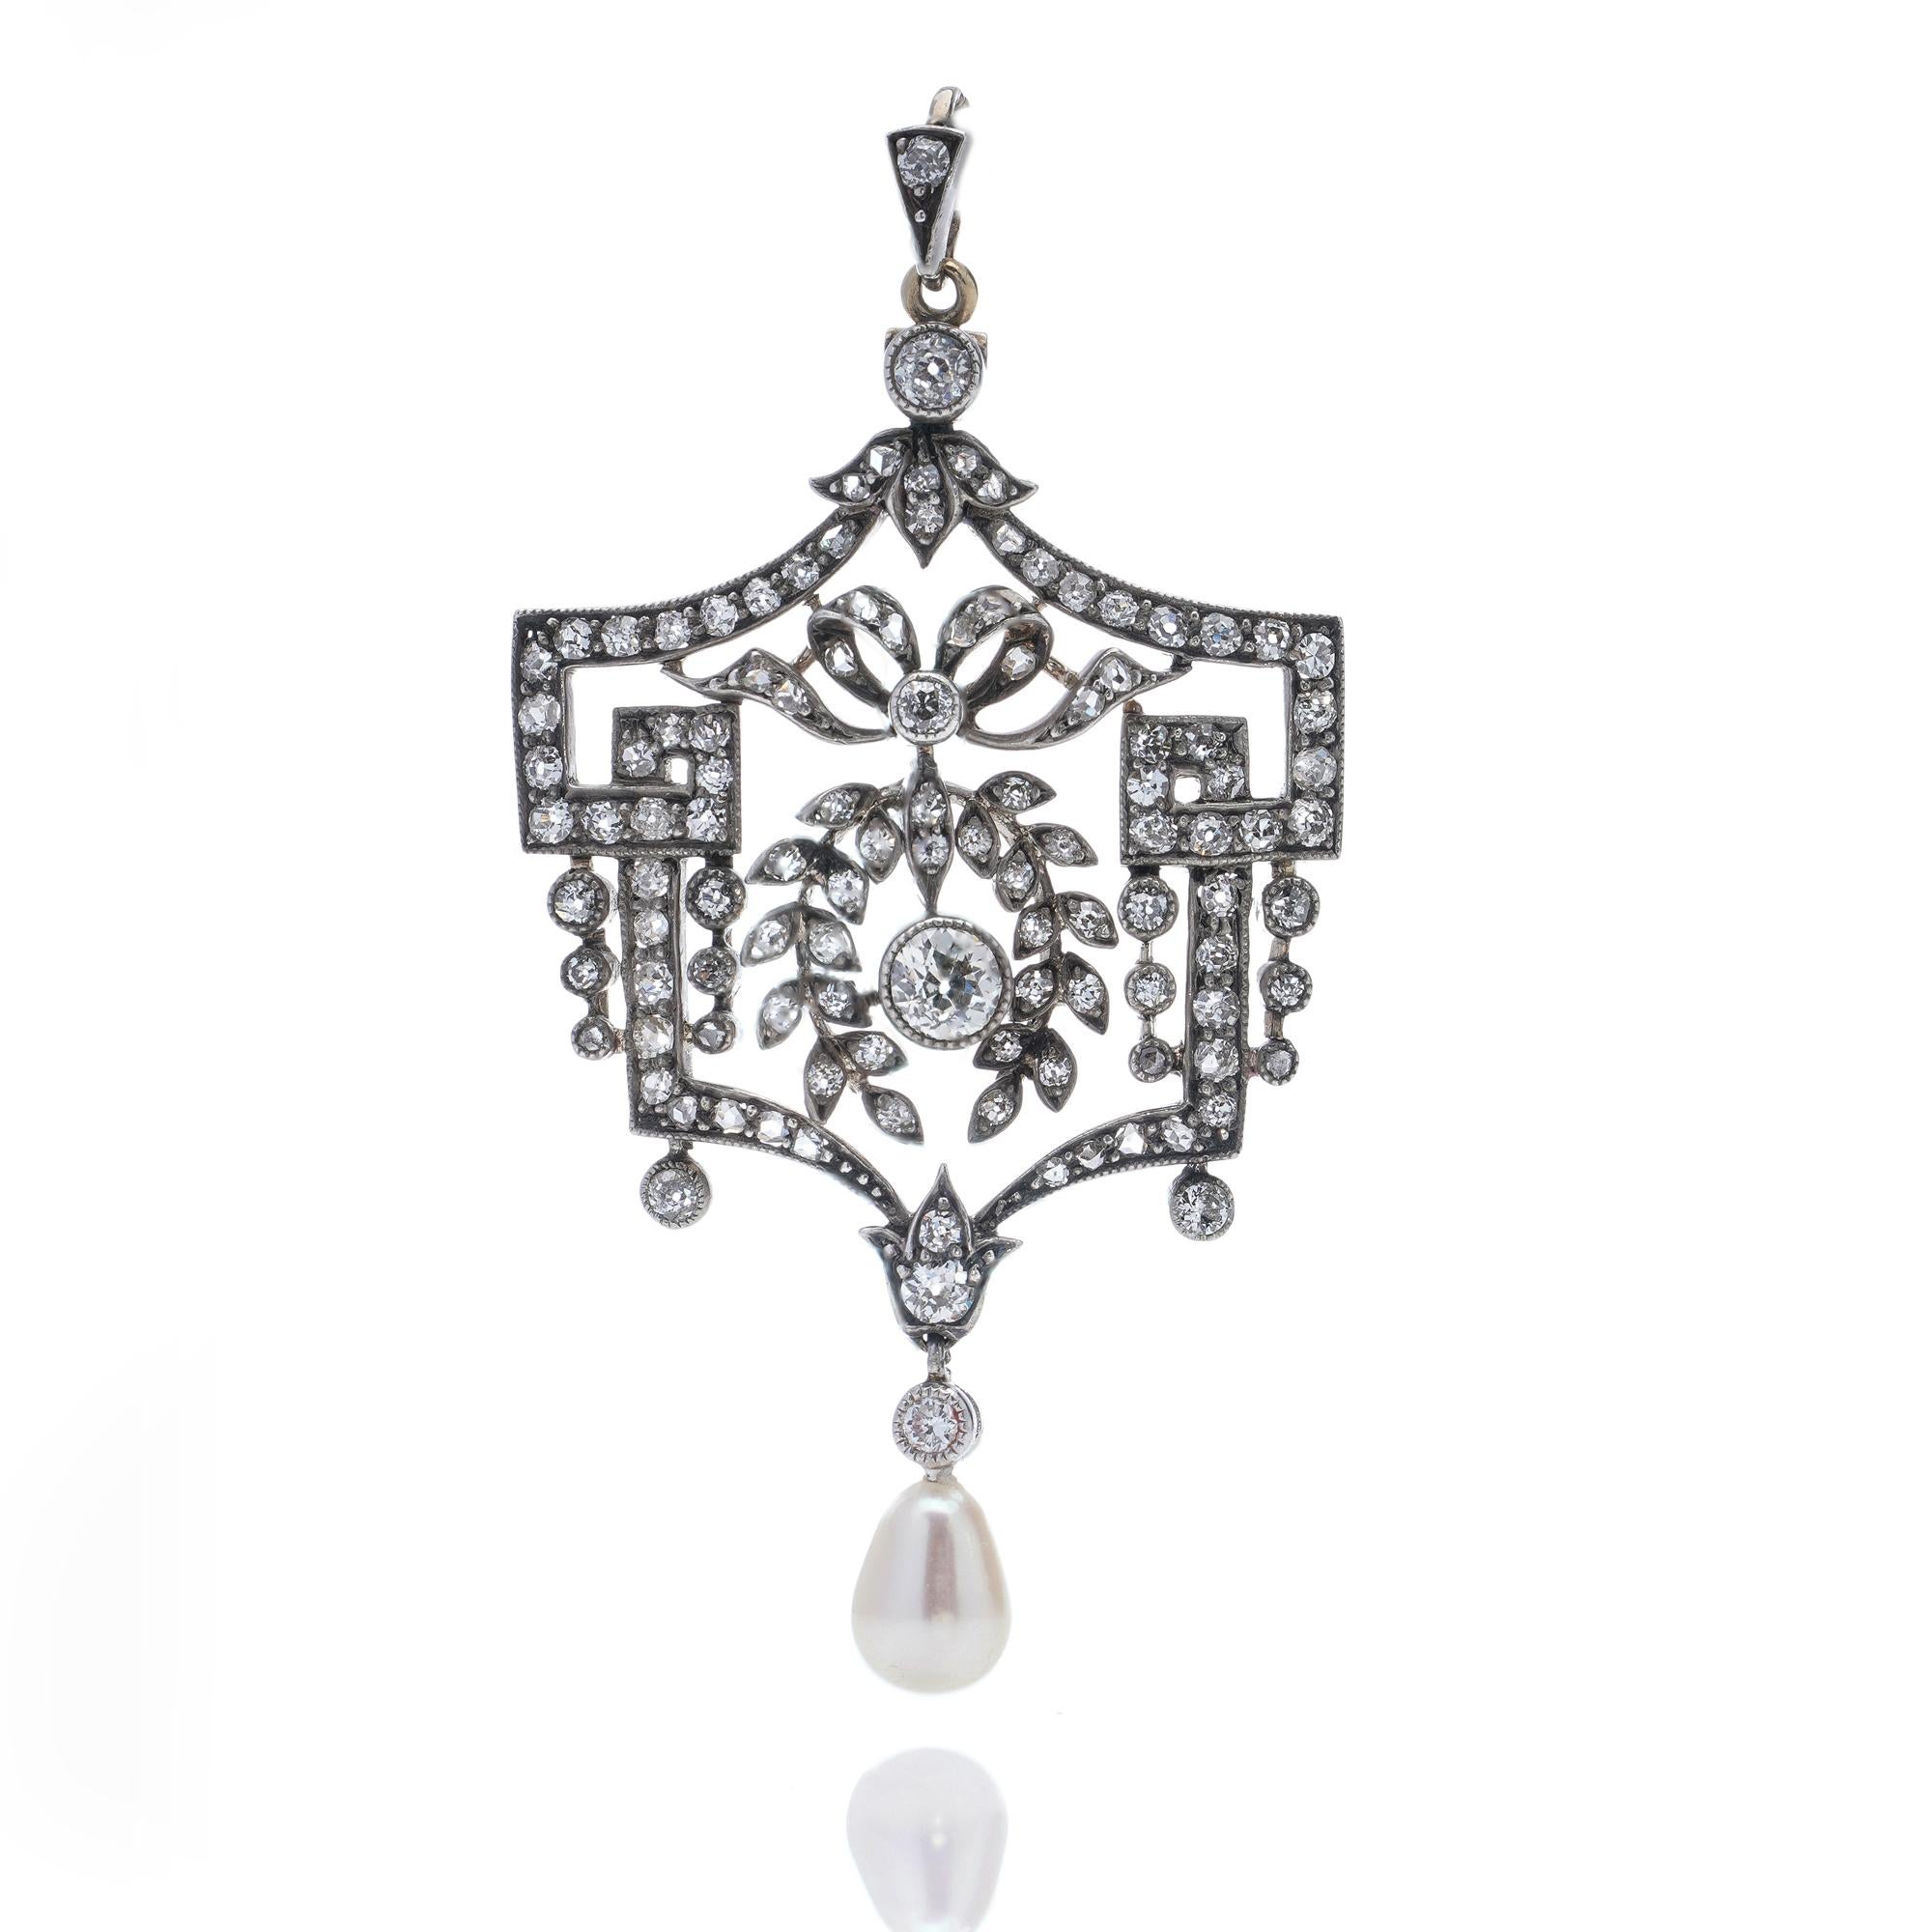 Belle Époque 18kt. gold and silver pendant with diamonds and natural freshwater pearl.
Circa.1900
Luxurious pendant of the Belle Époque period which is beautifully decorated with old cut diamonds adding up to a total of 1.60 carats as well as a